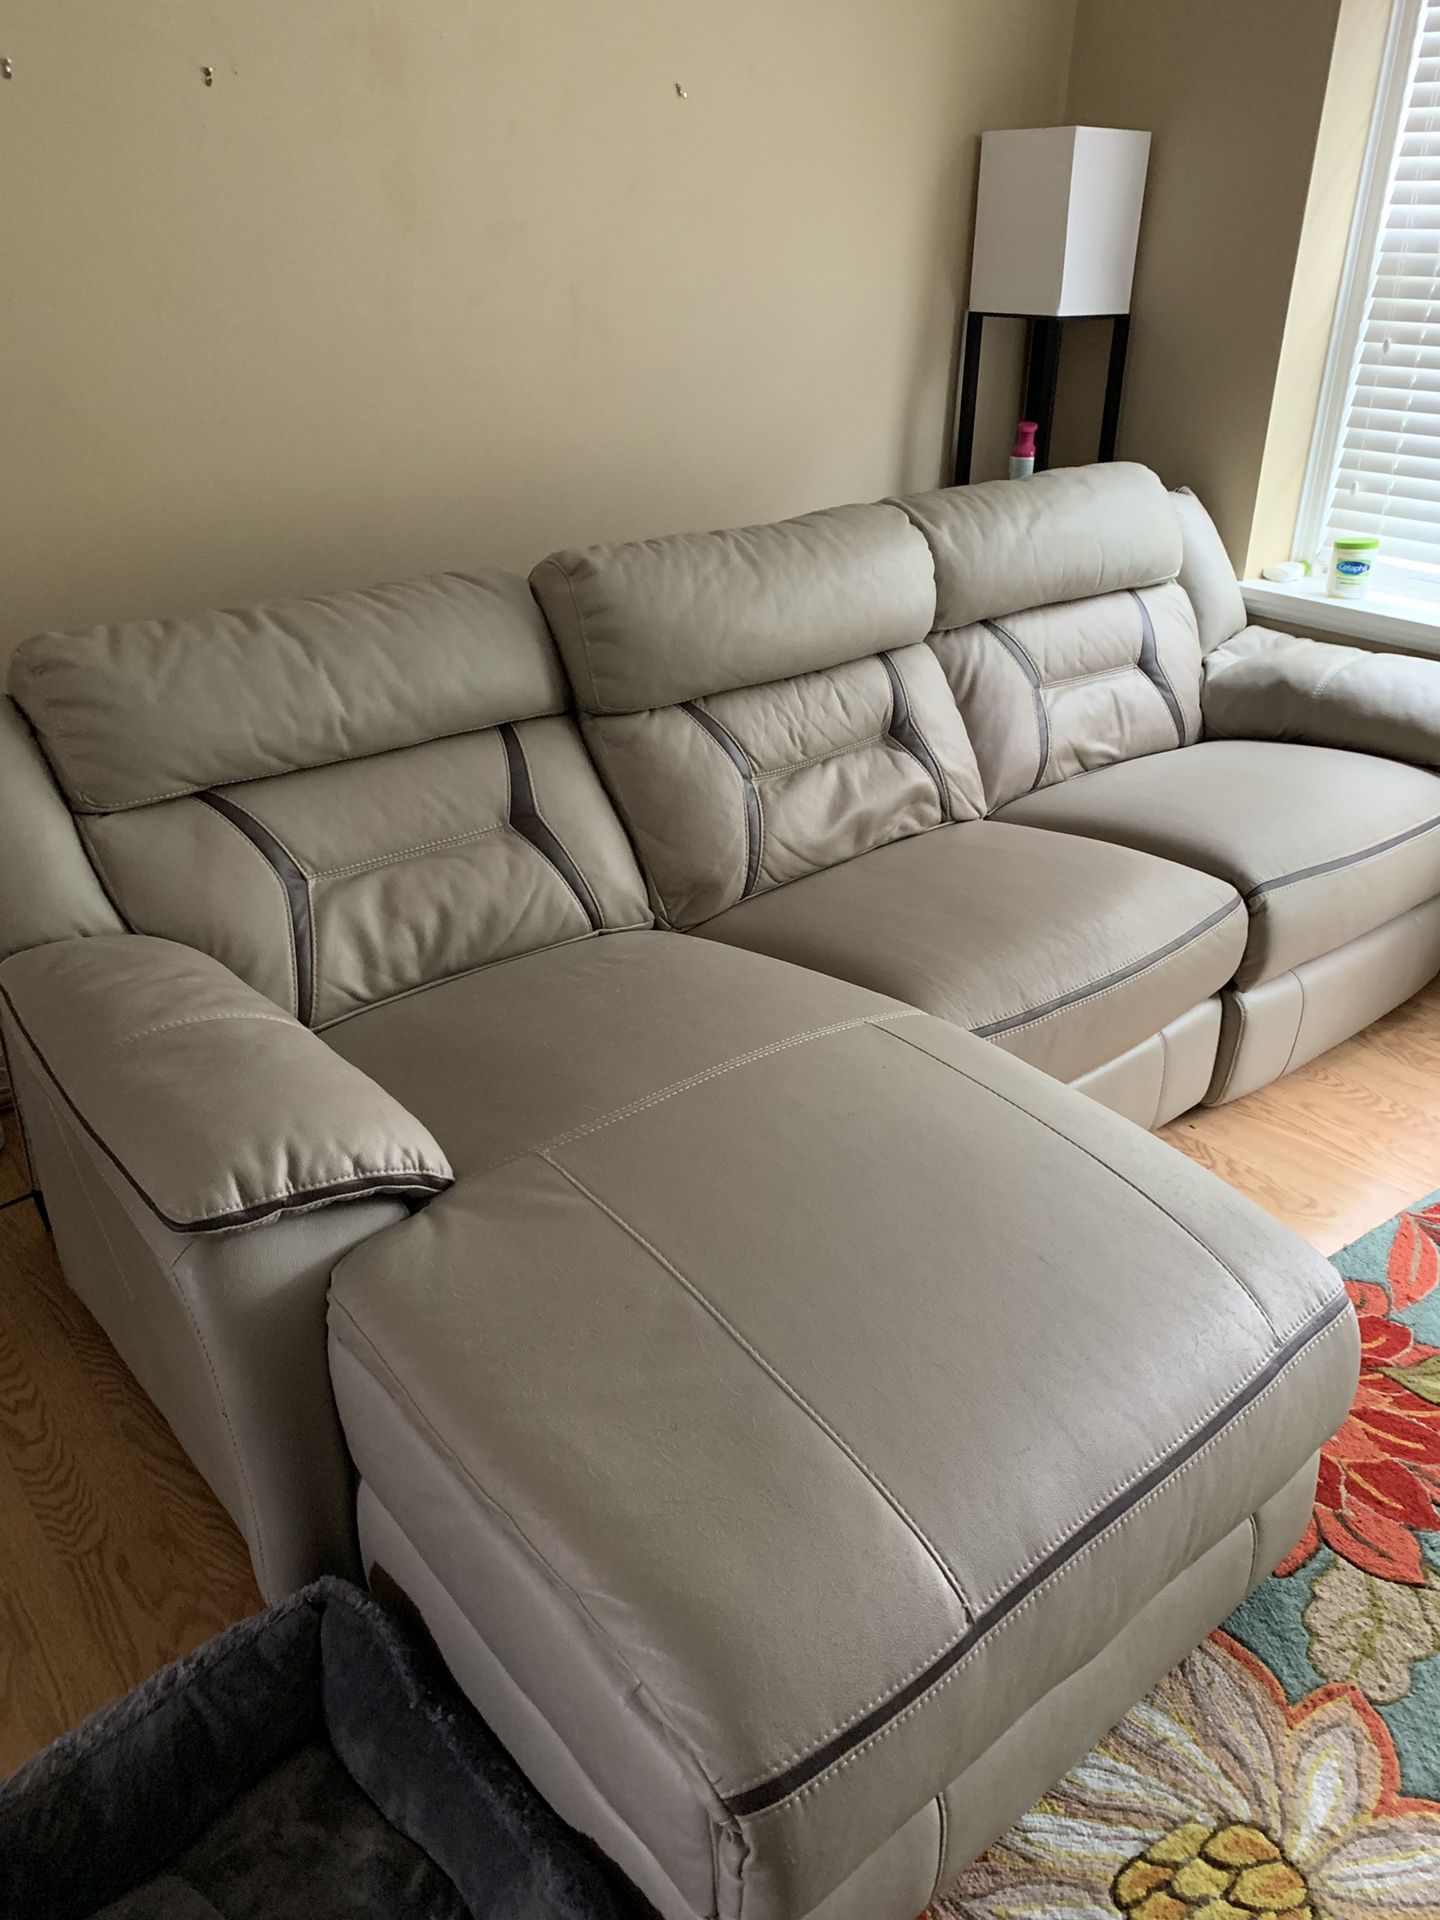 Leather dual reclining couch